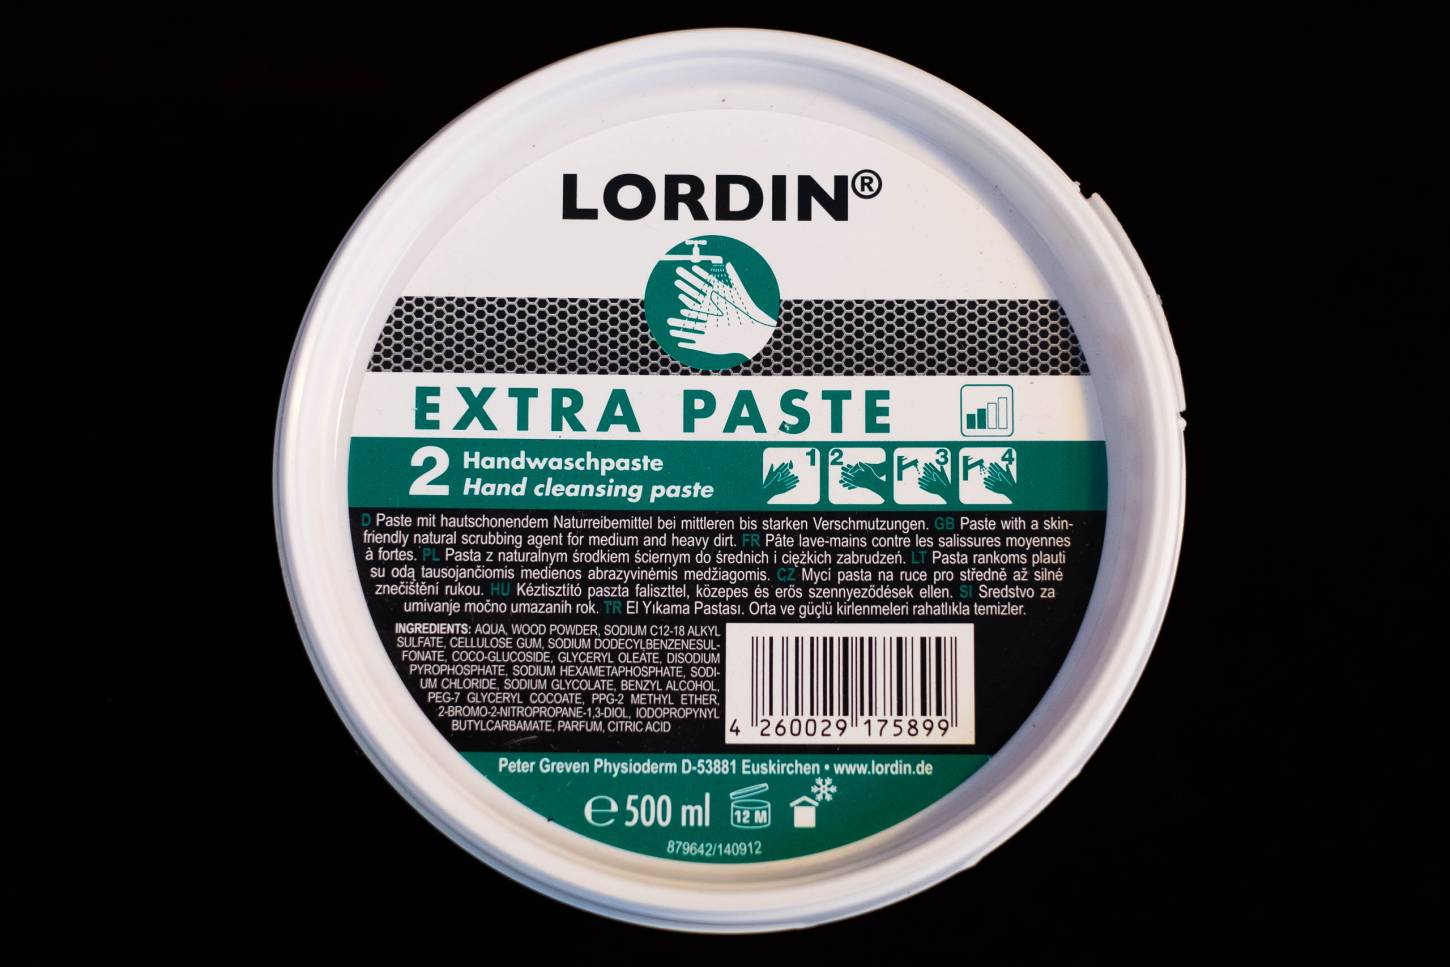 Hand washing paste "Extra Paste" from Lordin